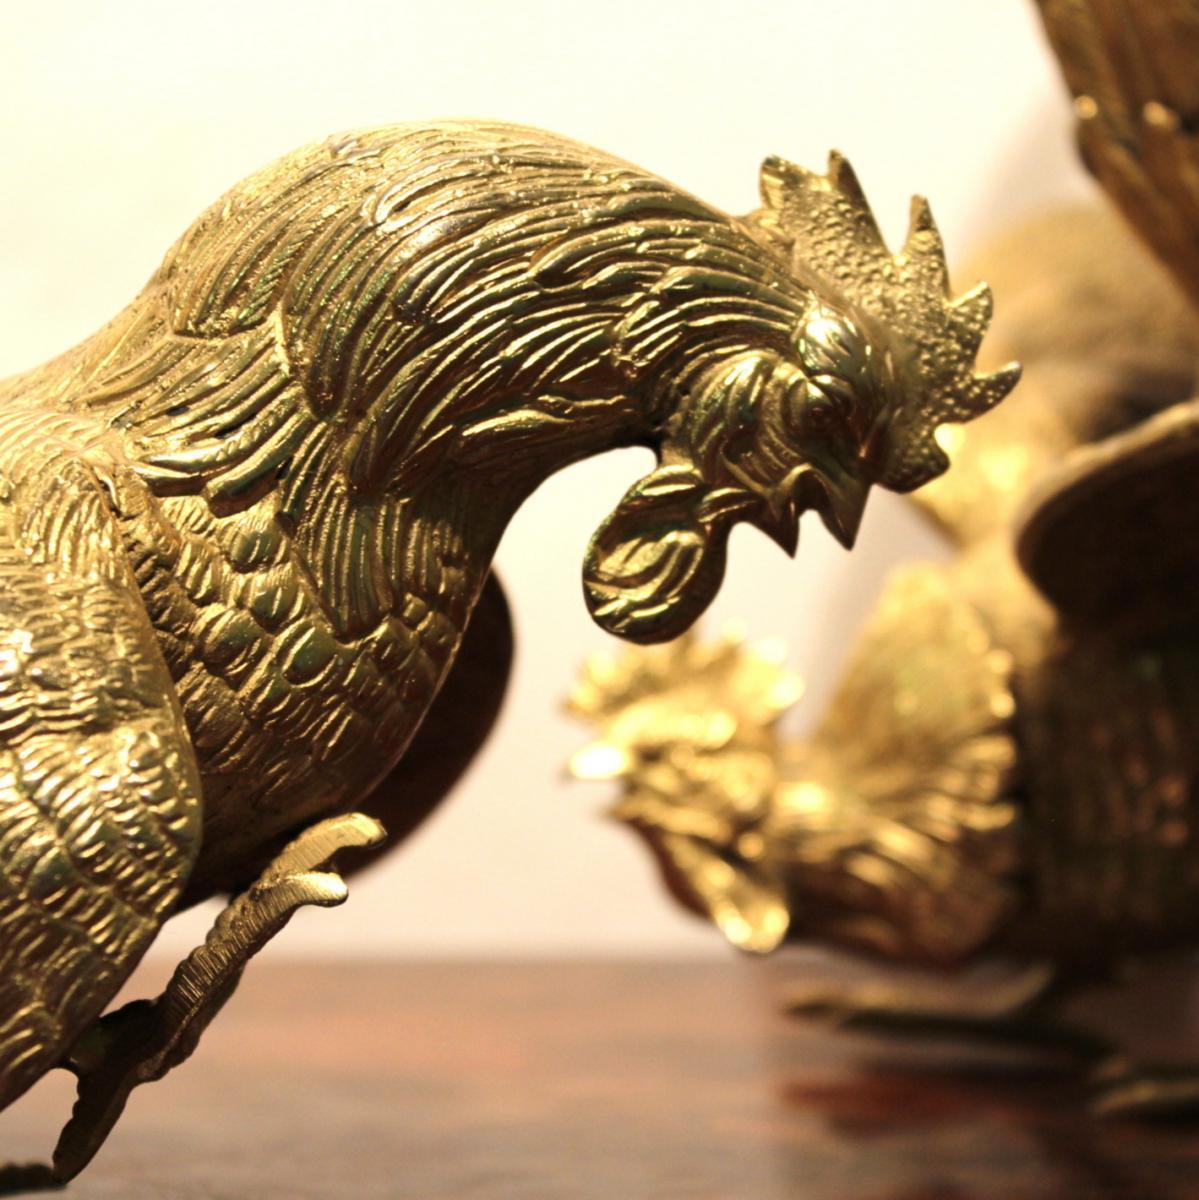 Pair of fighting cocks dating to half of the 19th century integrally gilt bronze finely chiseled.
Period: Early 20th century
Origin: France
In very good state of conservation.
Our team is at your disposal for more information, more photos on